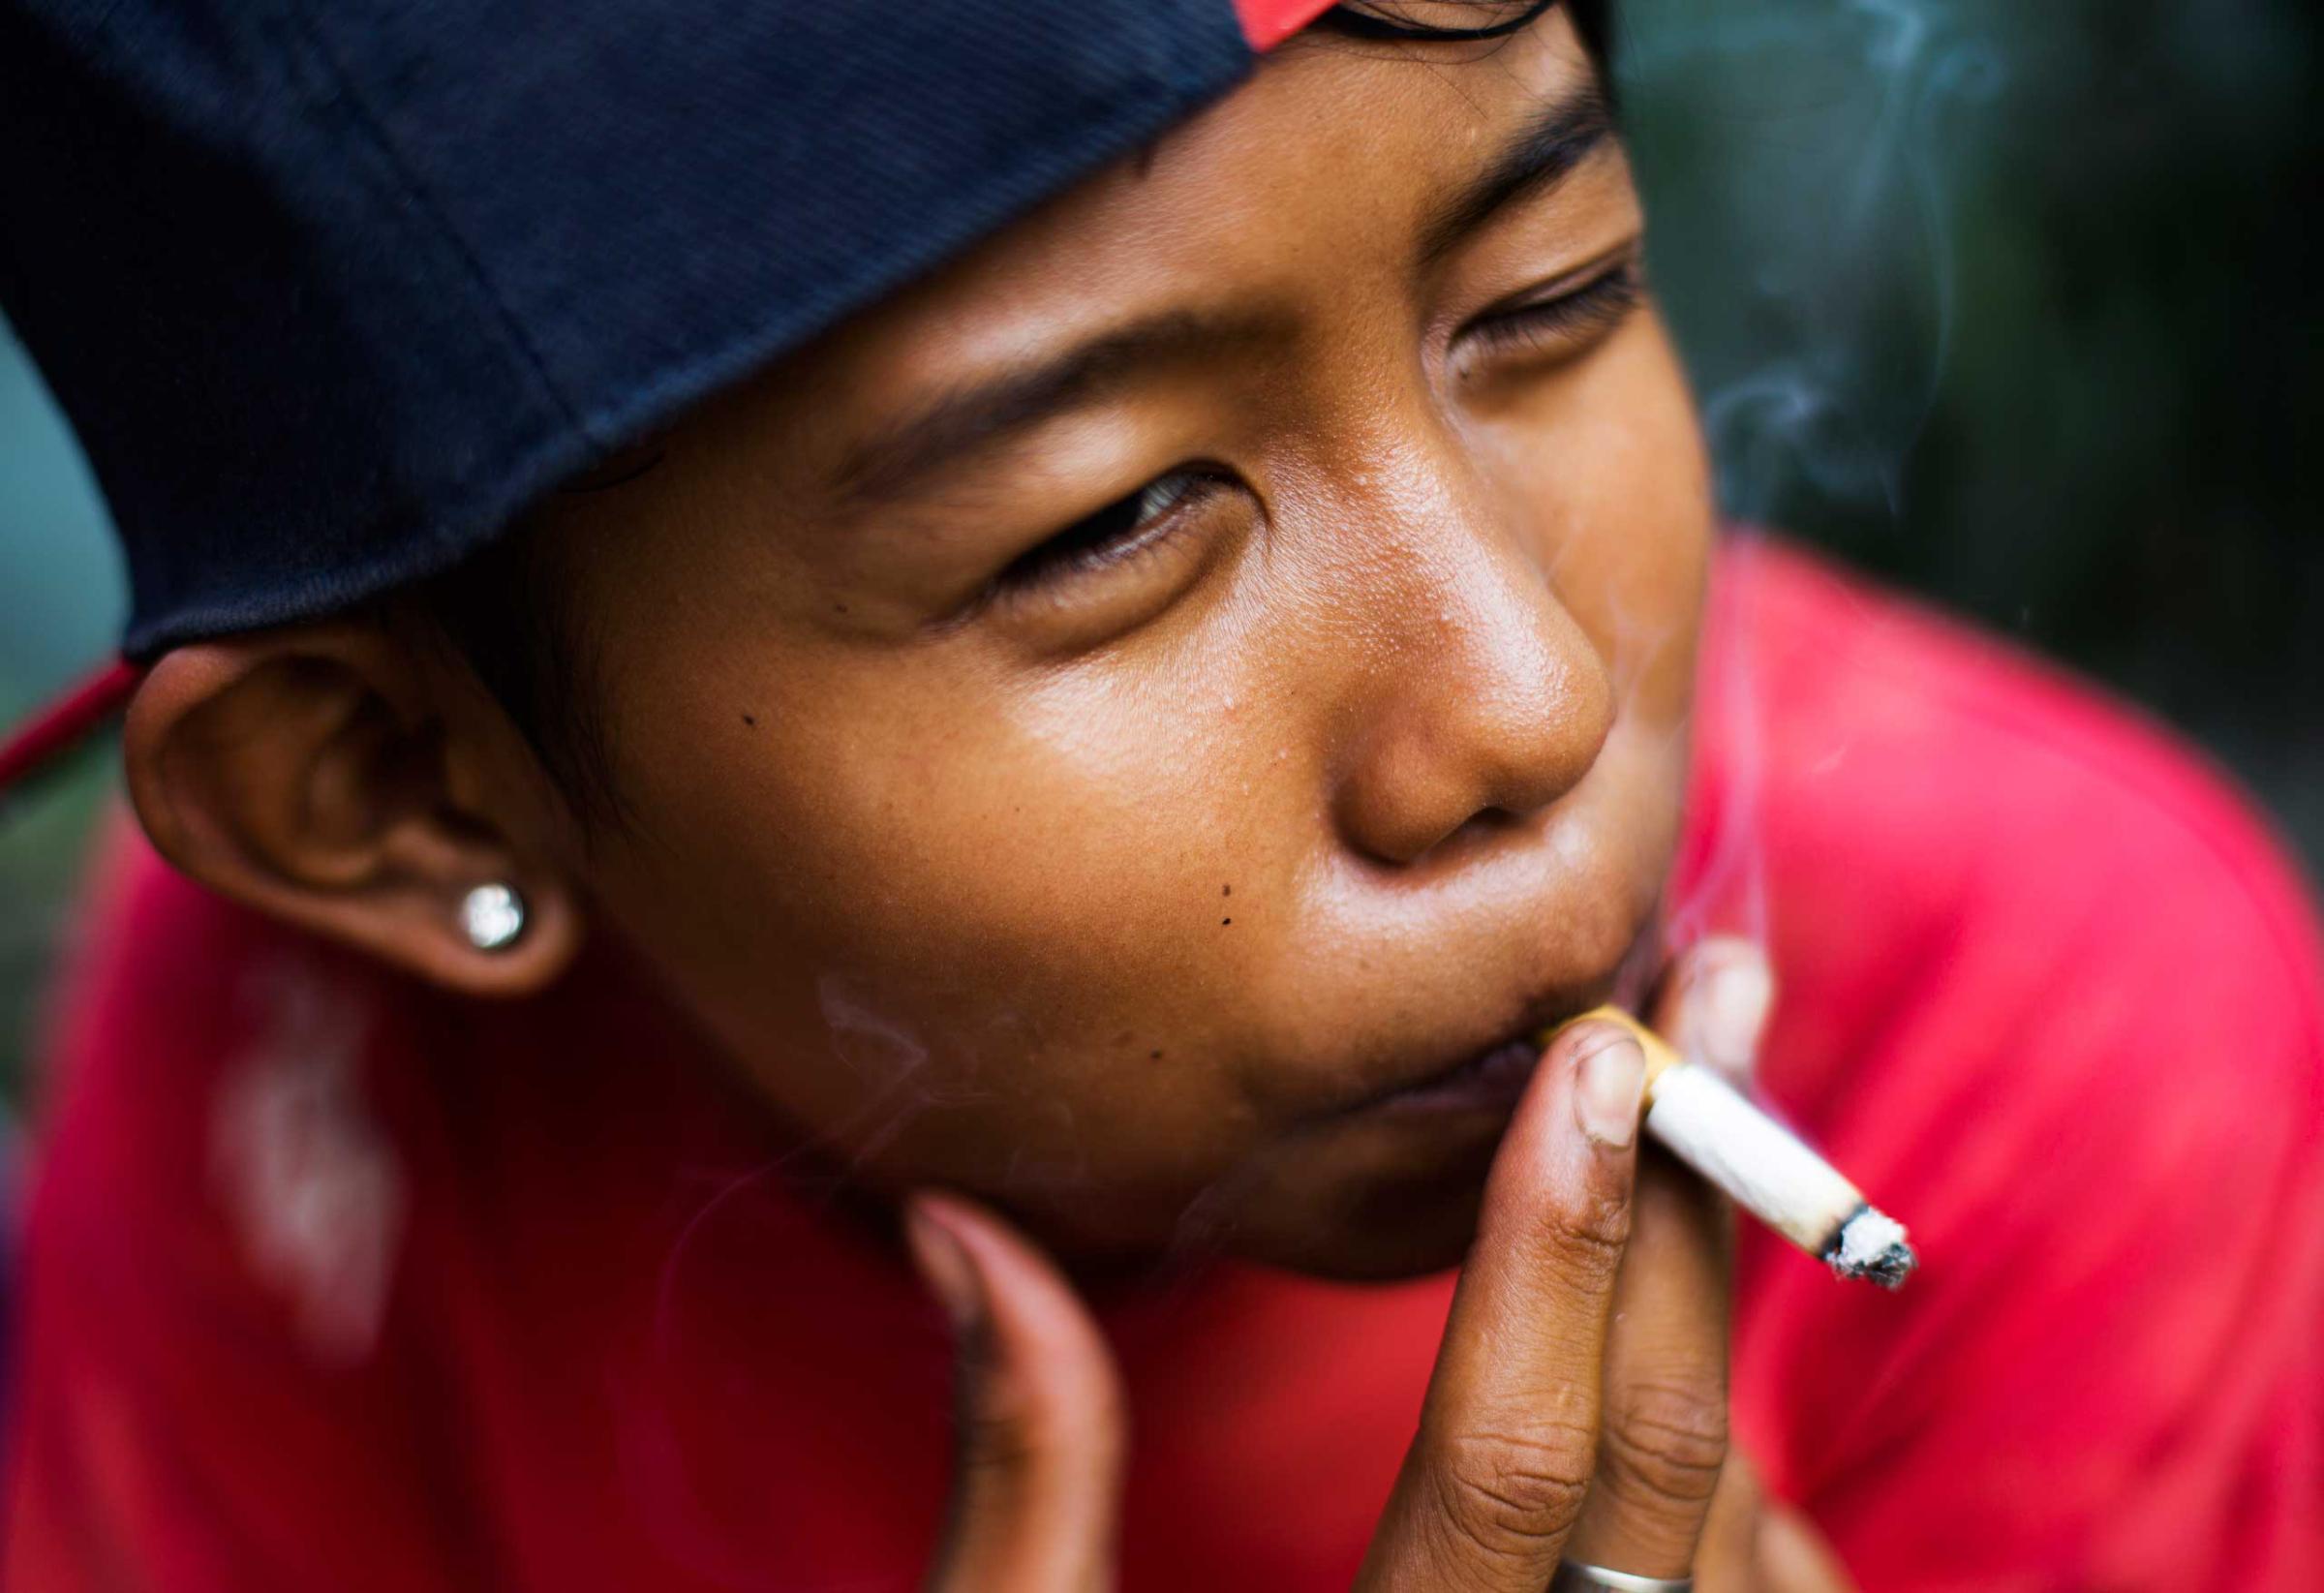 Ompong, which means "toothless" in Bahasa, poses for a photograph as he has a cigarette in South Jakarta, Indonesia on February 14, 2014.